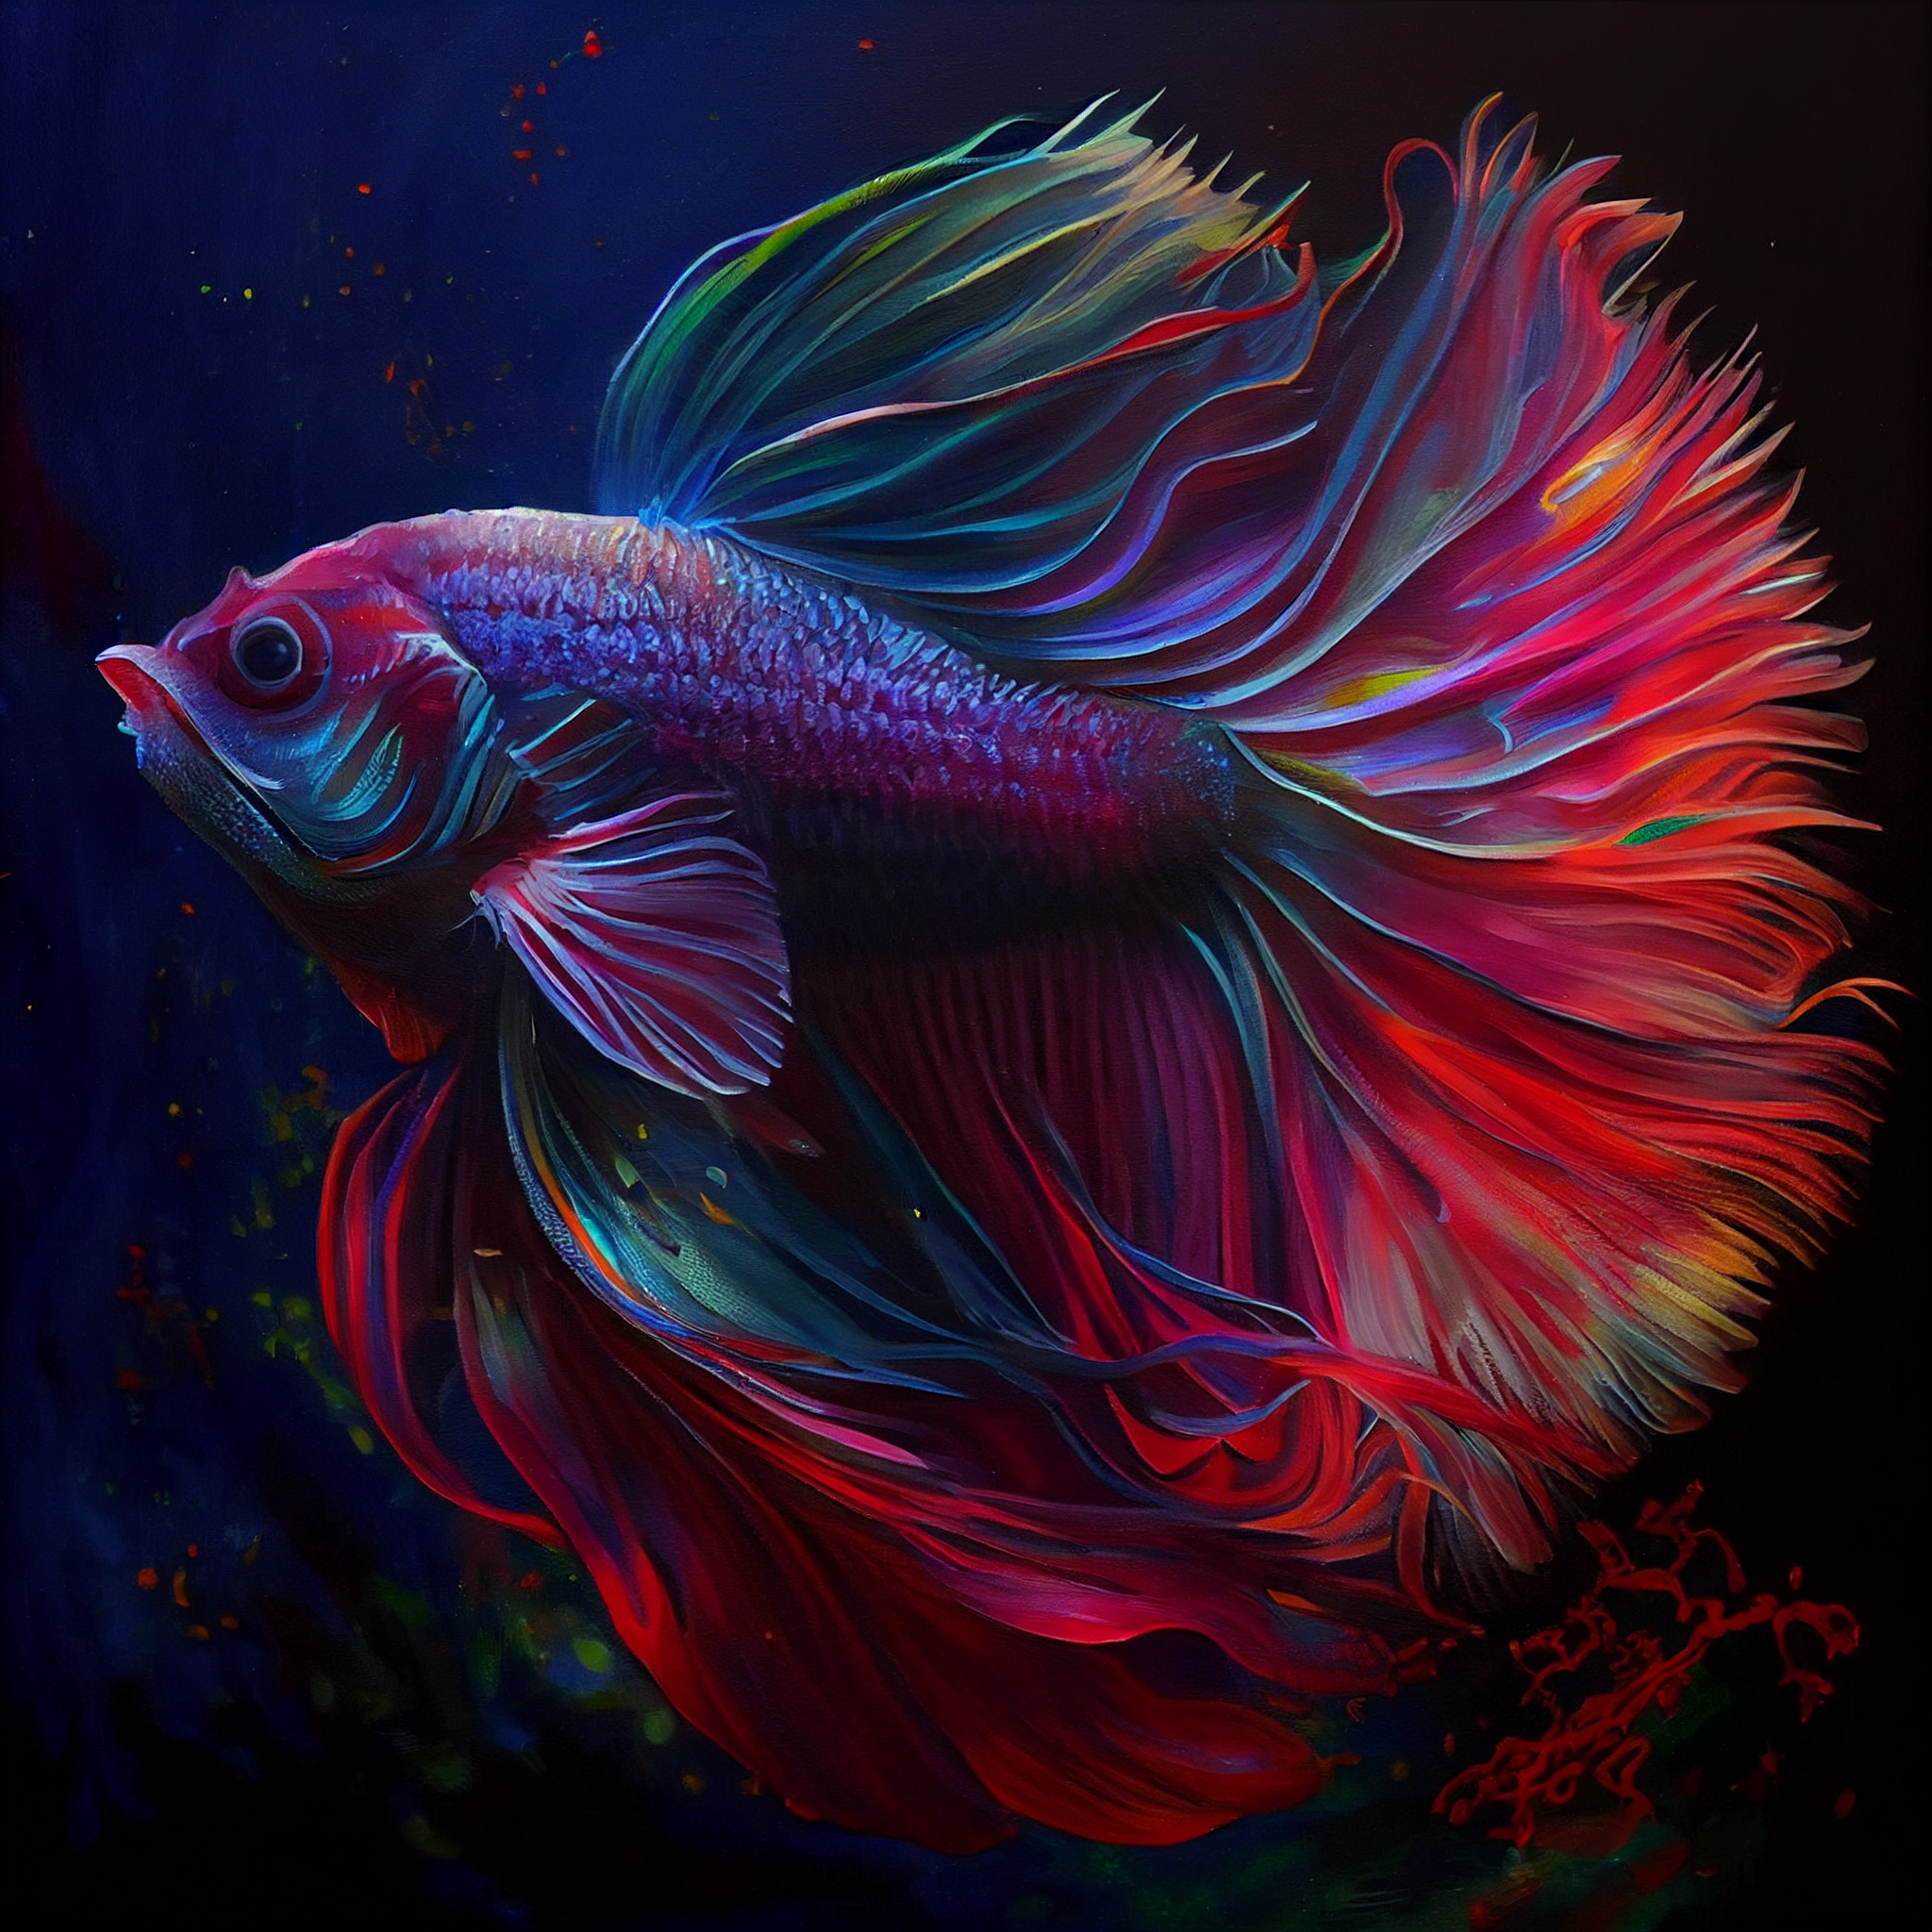 Acrylic Art Print of a Beautiful and Colorful Fighter Fish